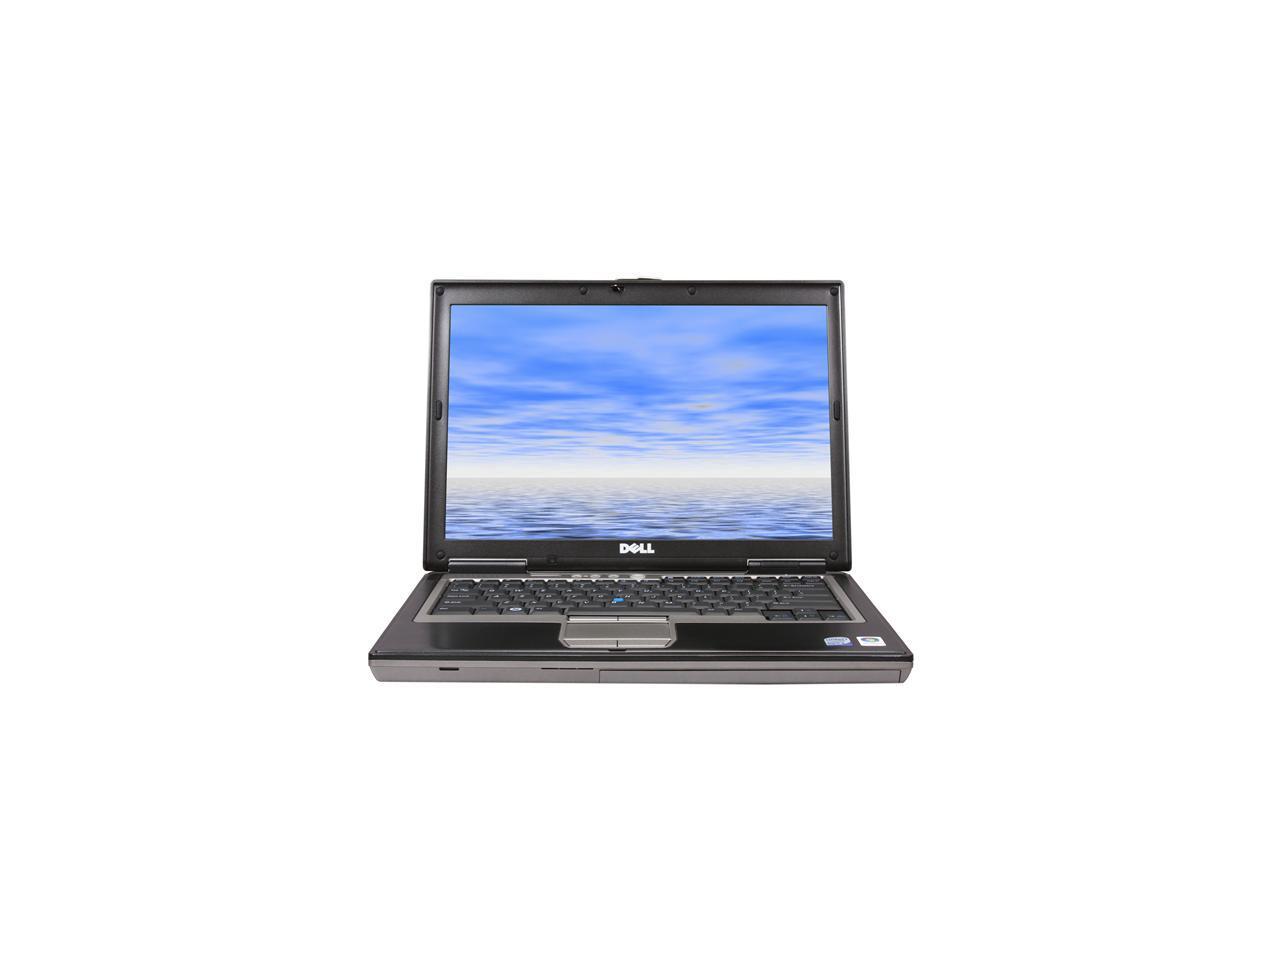 Refurbished: DELL Laptop Latitude D630 Intel Core 2 Duo 1.83 GHz 1 GB